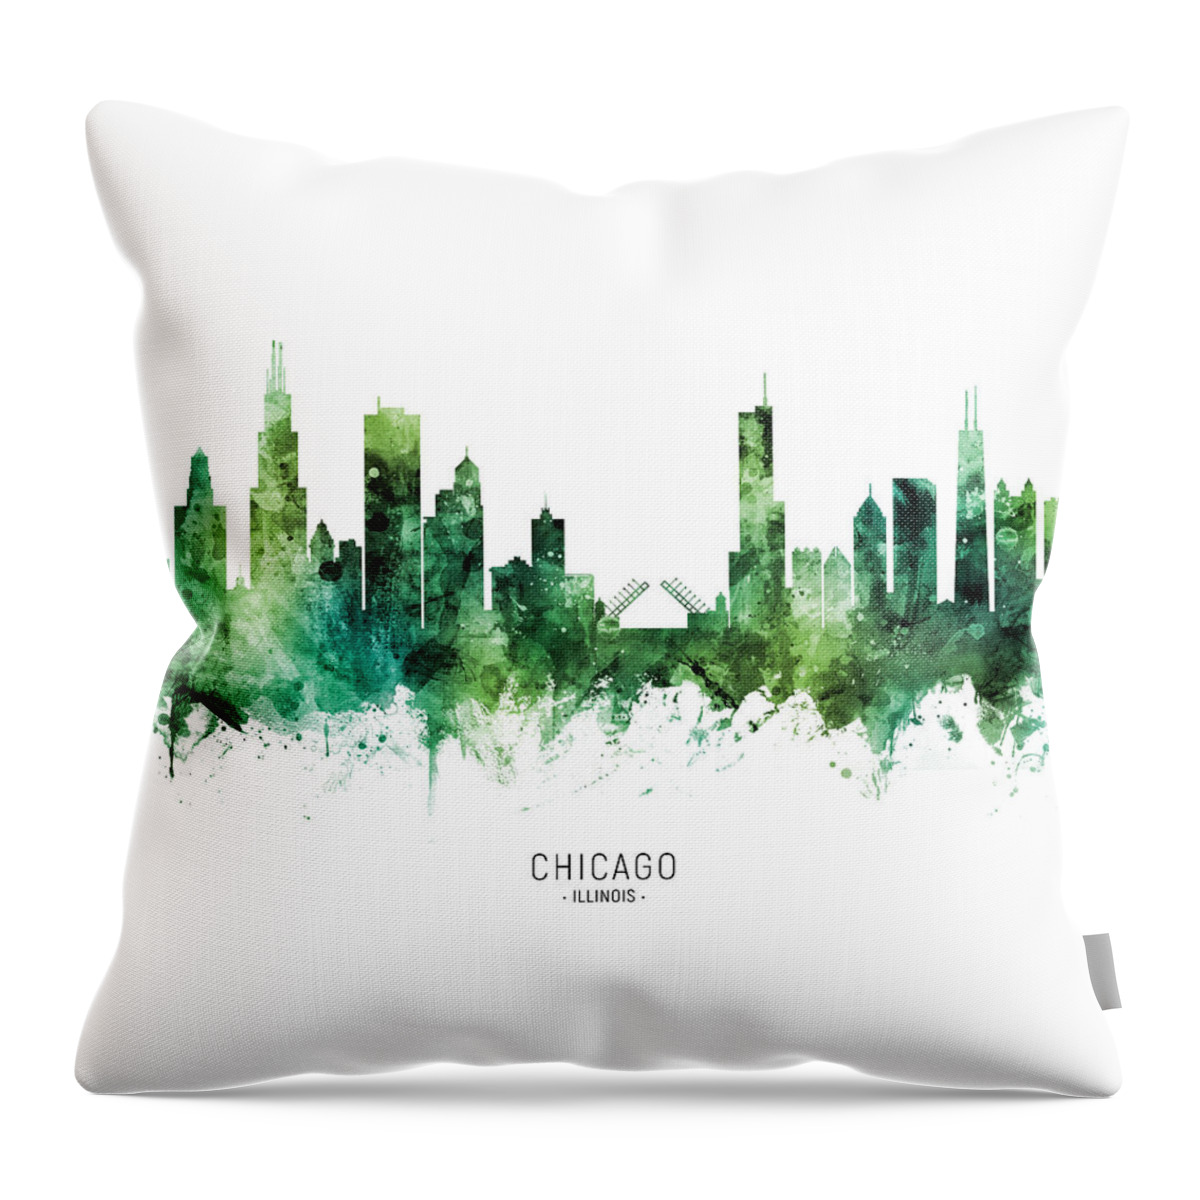 Chicago Throw Pillow featuring the digital art Chicago Illinois Skyline #77 by Michael Tompsett